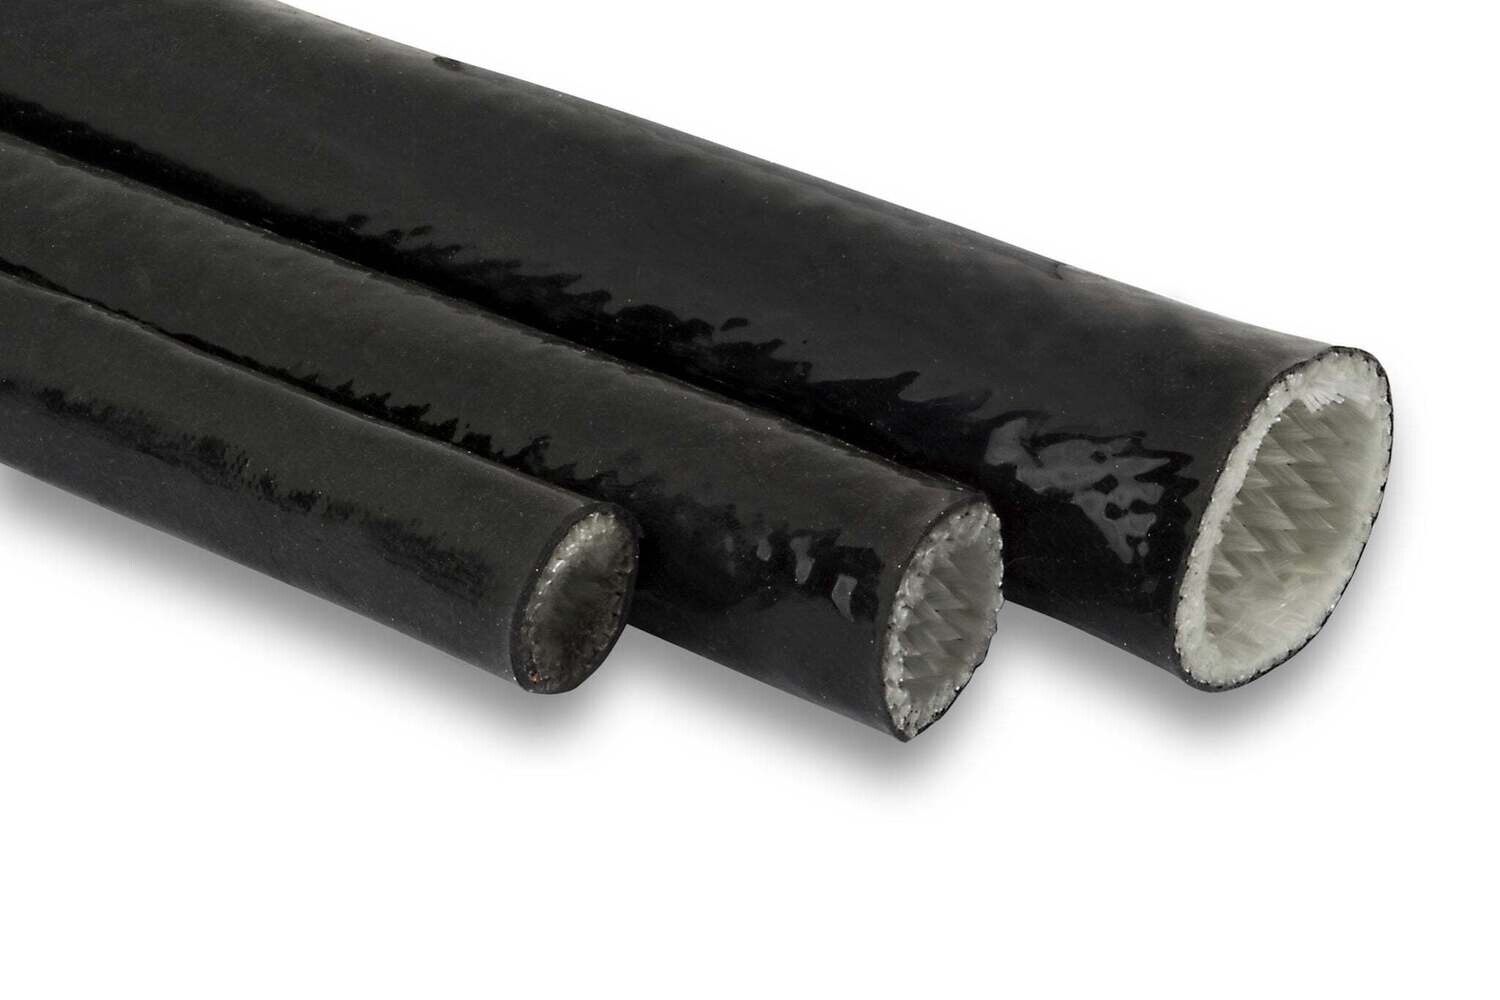 Black Silicon High Heat Sleeve - AN16 (Utilises 25mm Sleeving), 5.0m Multiple Qty will come on a continuous Roll